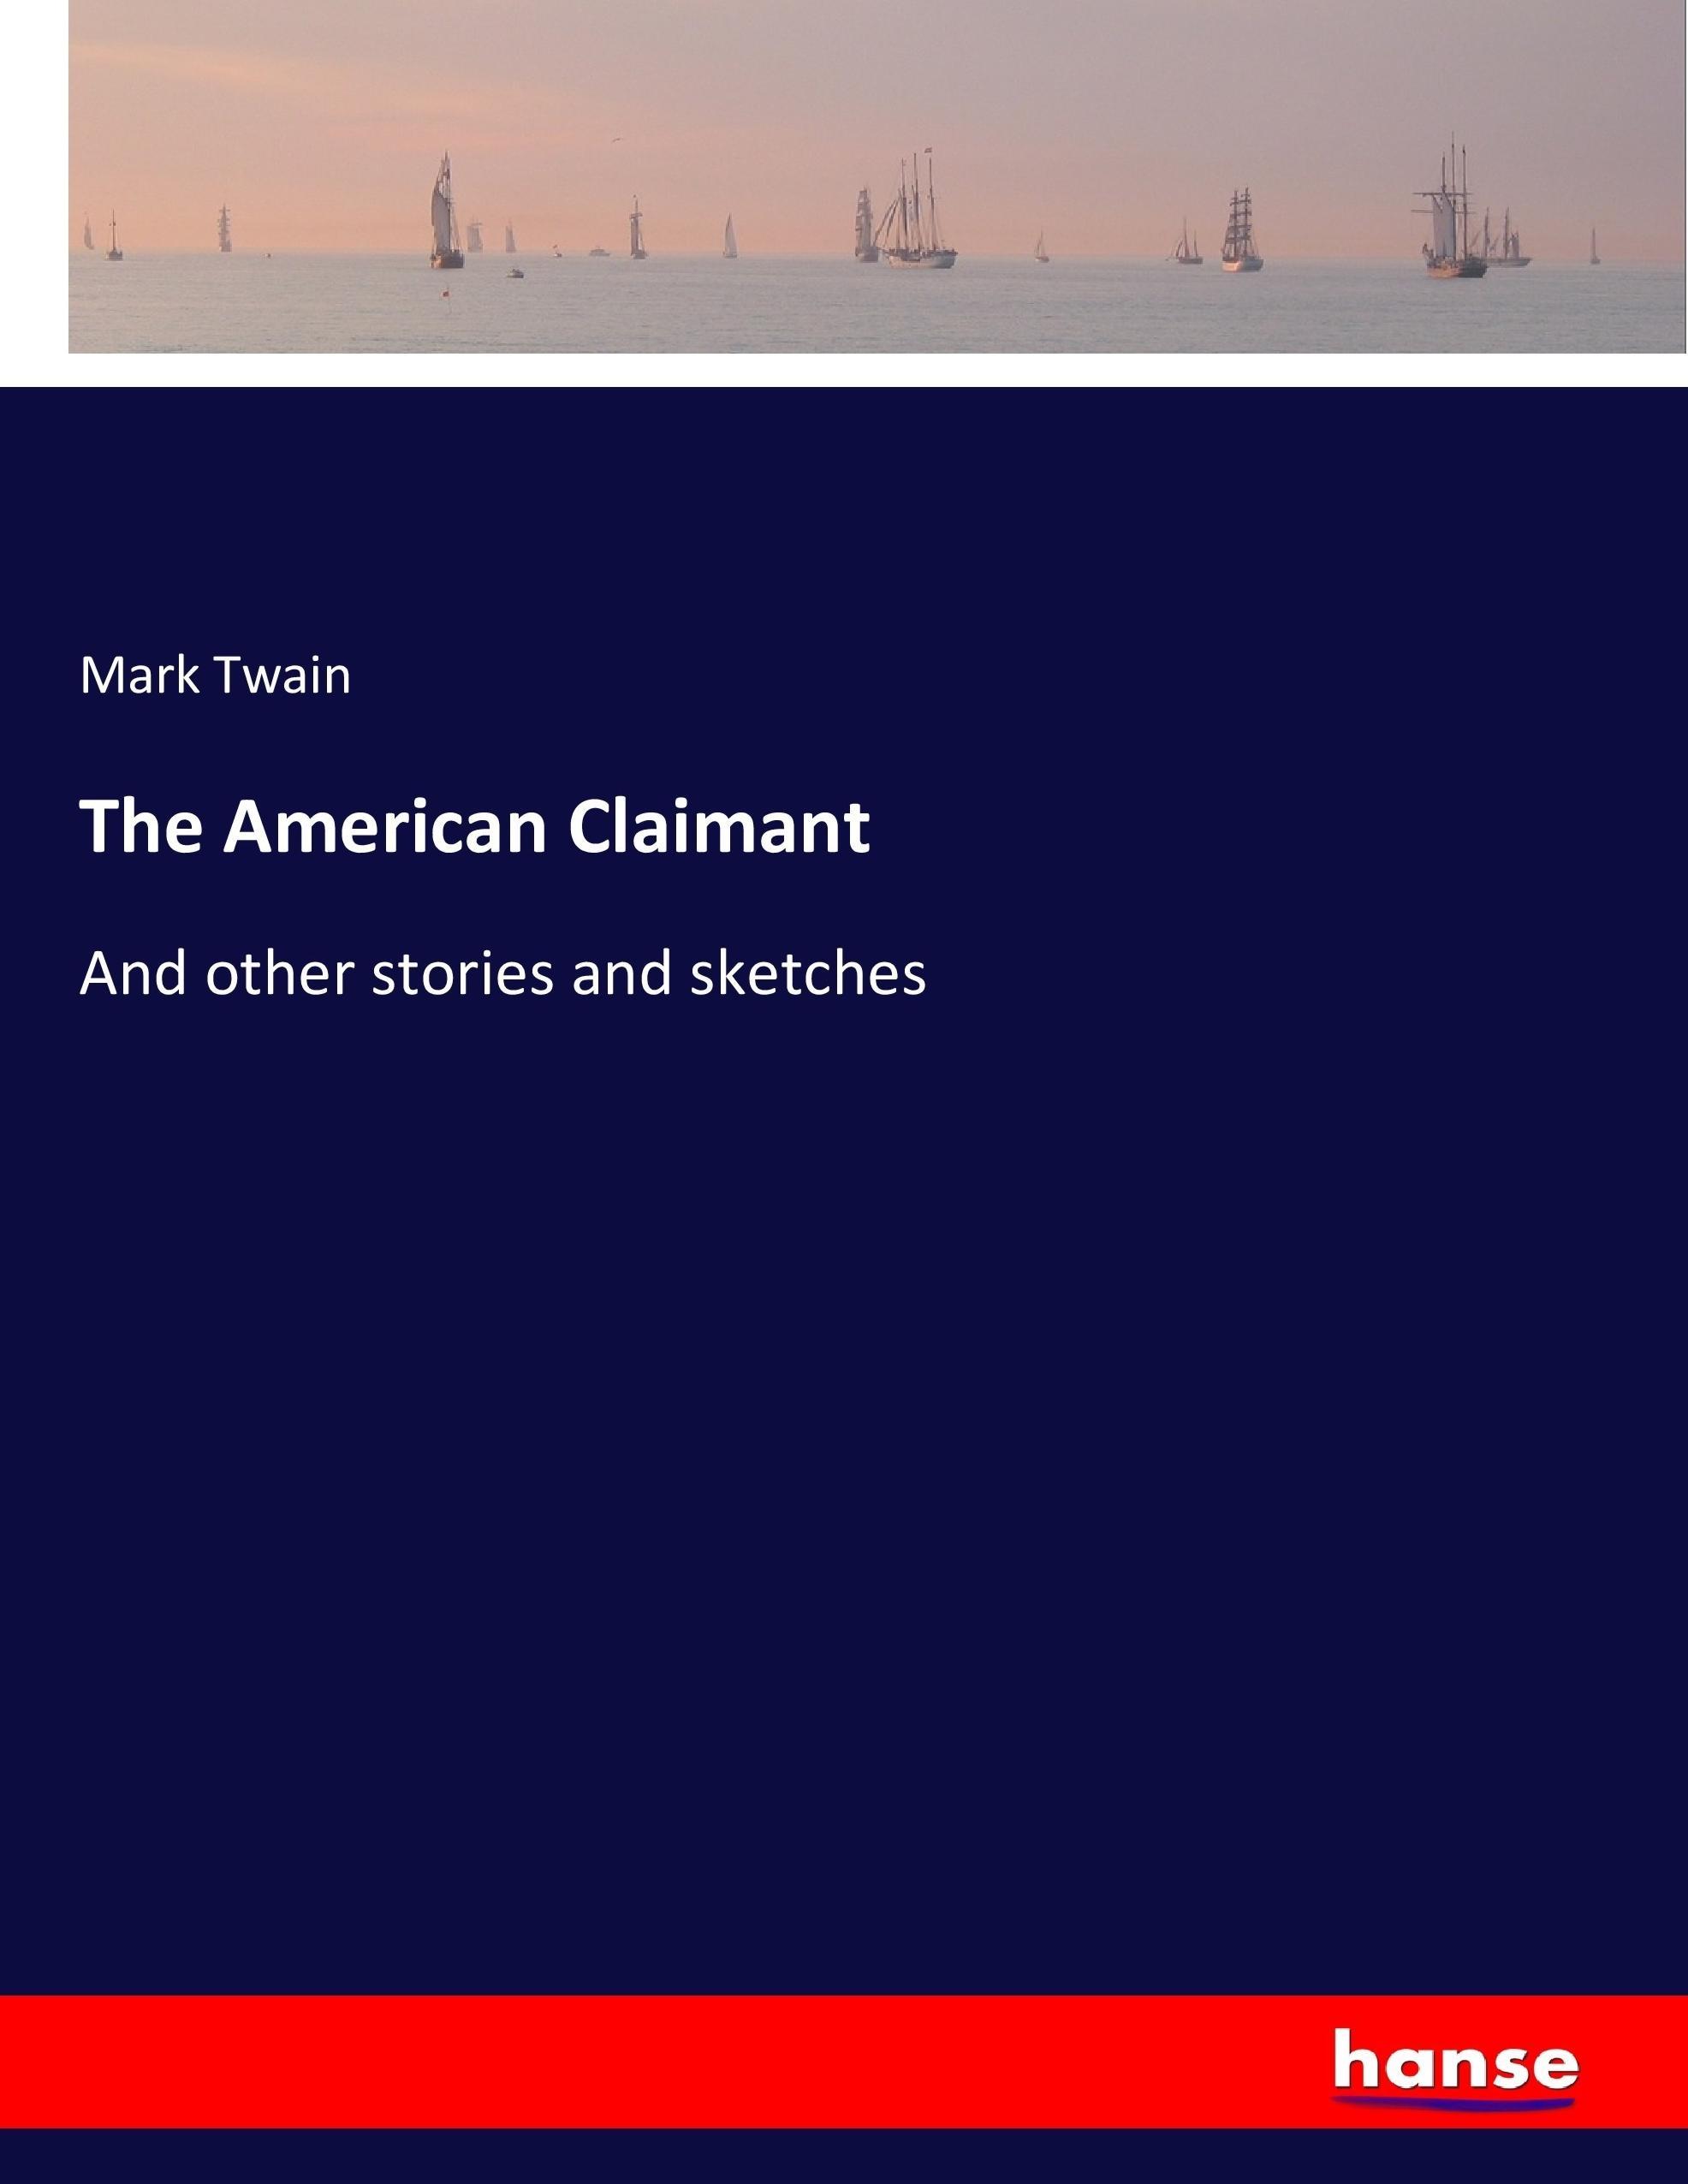 The American Claimant | And other stories and sketches | Mark Twain | Taschenbuch | Paperback | 548 S. | Englisch | 2017 | hansebooks | EAN 9783744747776 - Twain, Mark